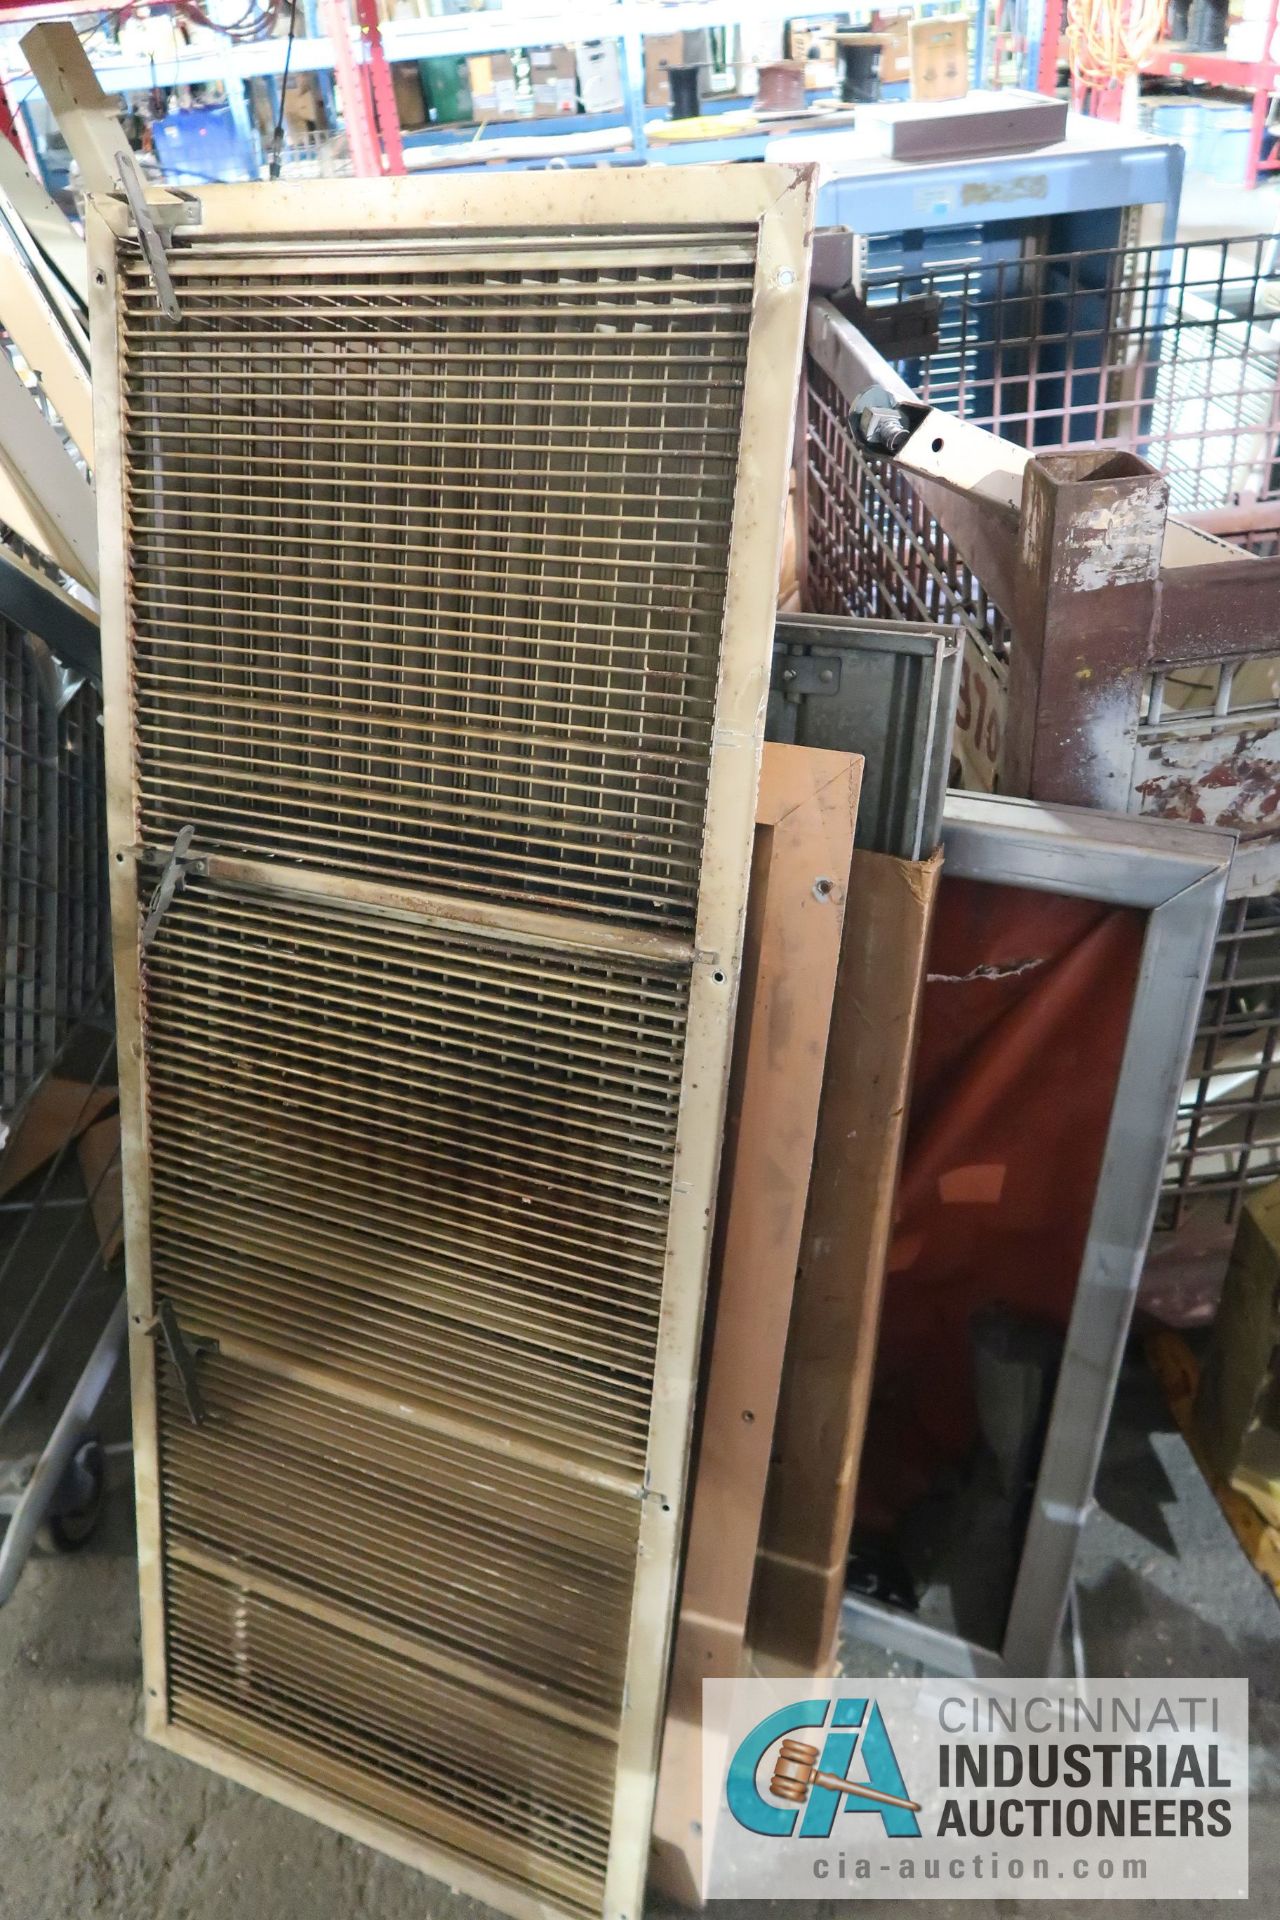 (LOT) CONTENTS OF (2) SECTIONS RACK - INSULATION MATERIAL, WIRE BASKET WITH HARDWARE - Image 4 of 7